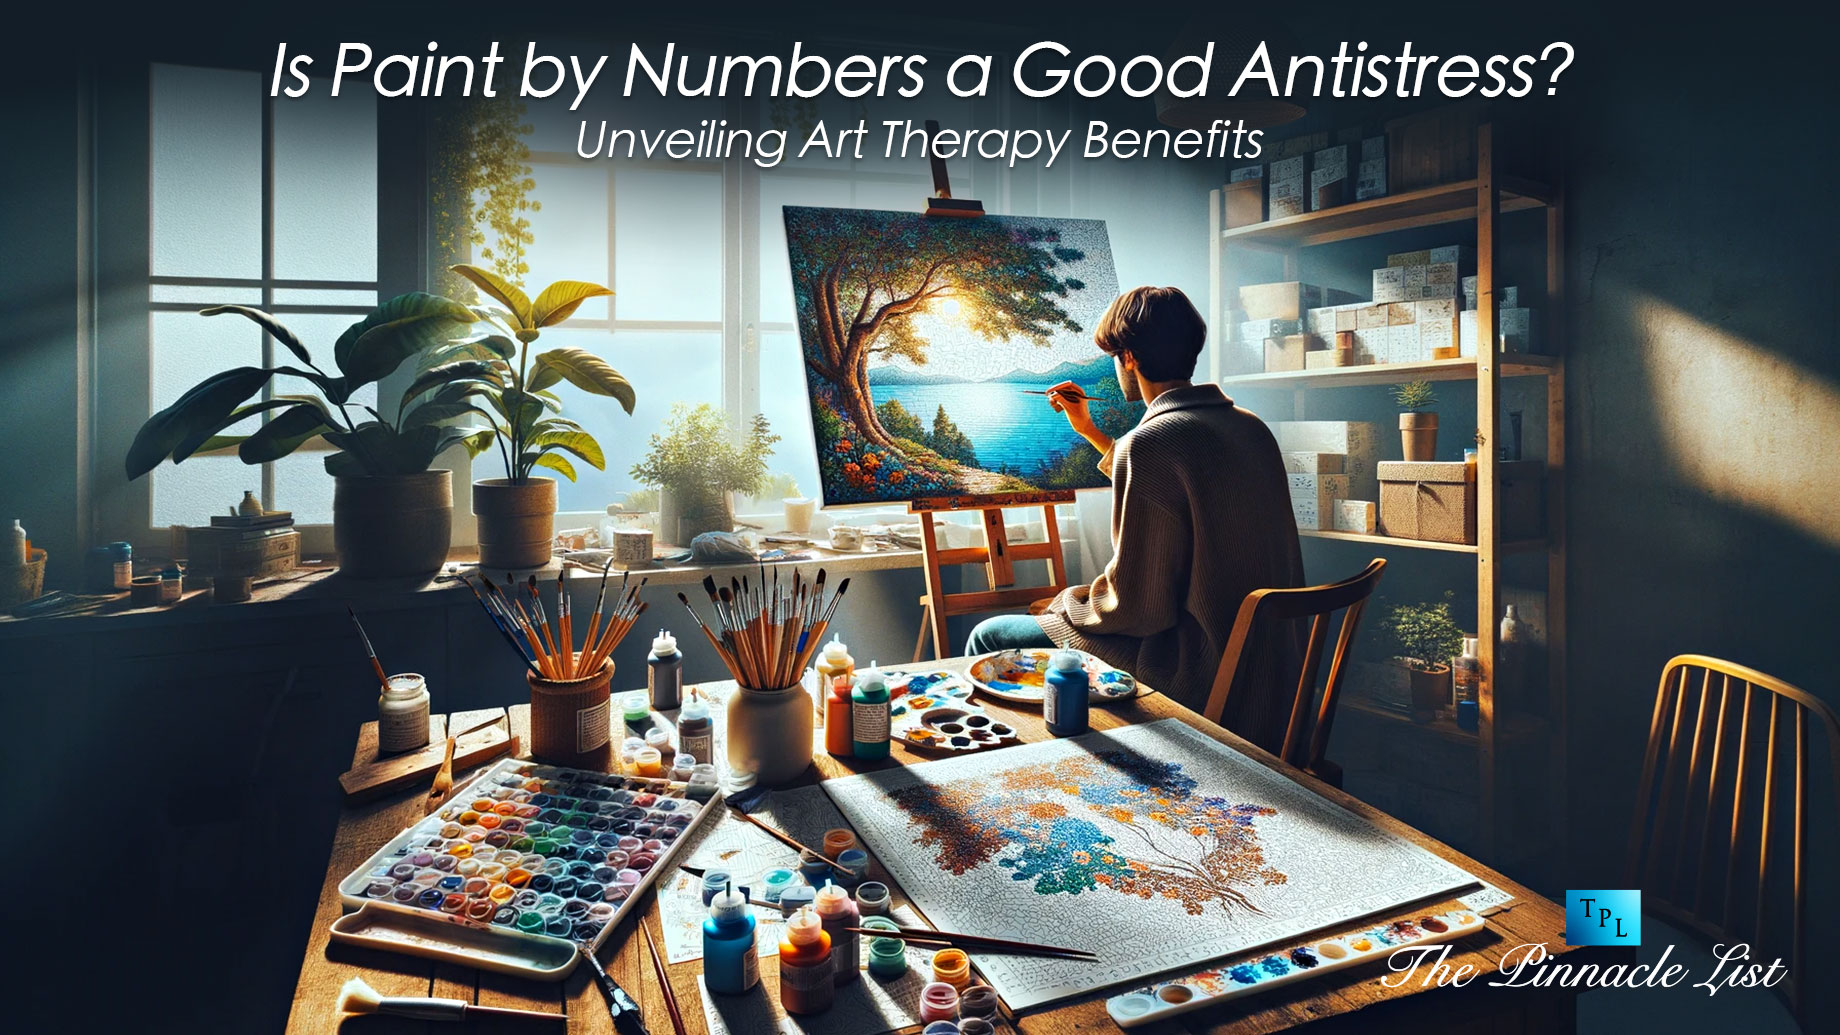 Is Paint by Numbers a Good Antistress? Unveiling Art Therapy Benefits